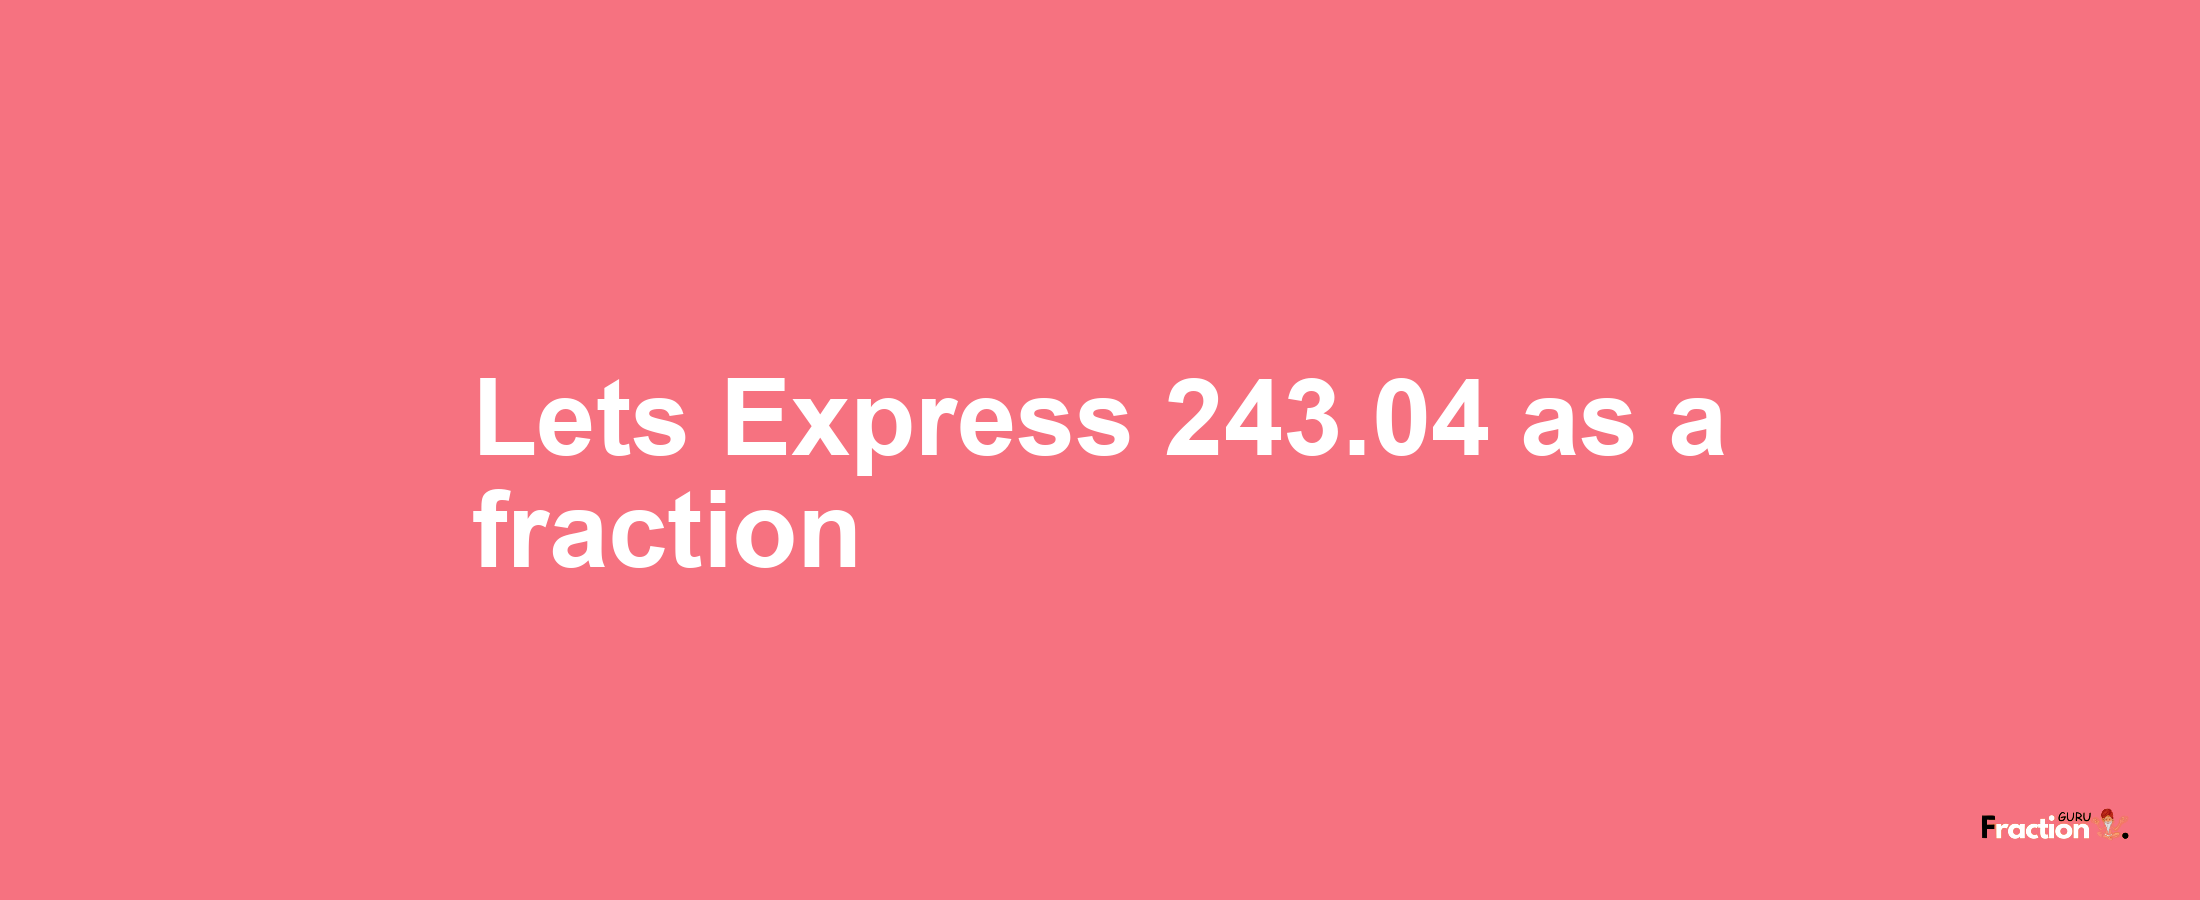 Lets Express 243.04 as afraction